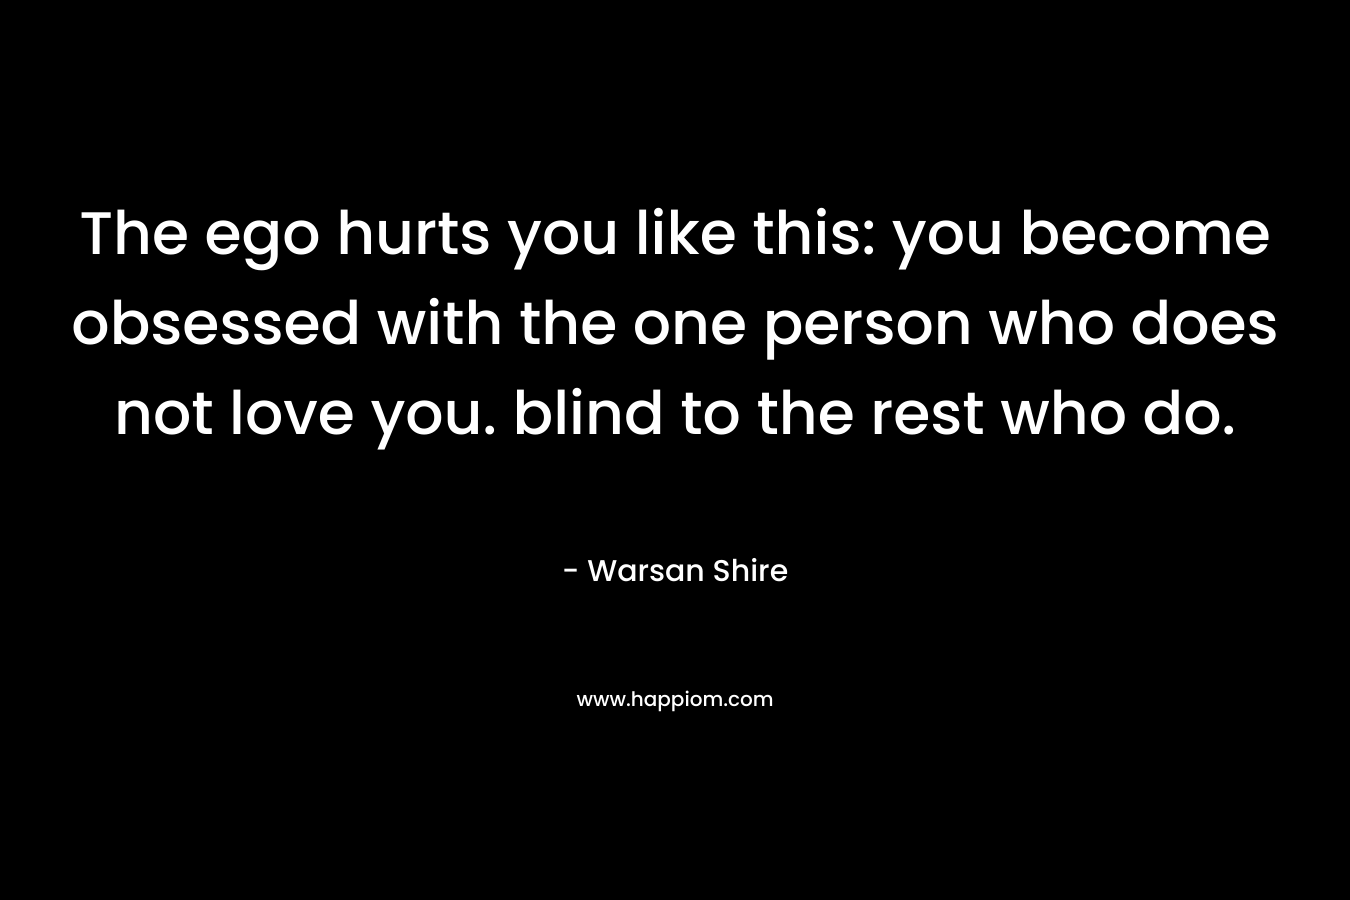 The ego hurts you like this: you become obsessed with the one person who does not love you. blind to the rest who do. – Warsan Shire